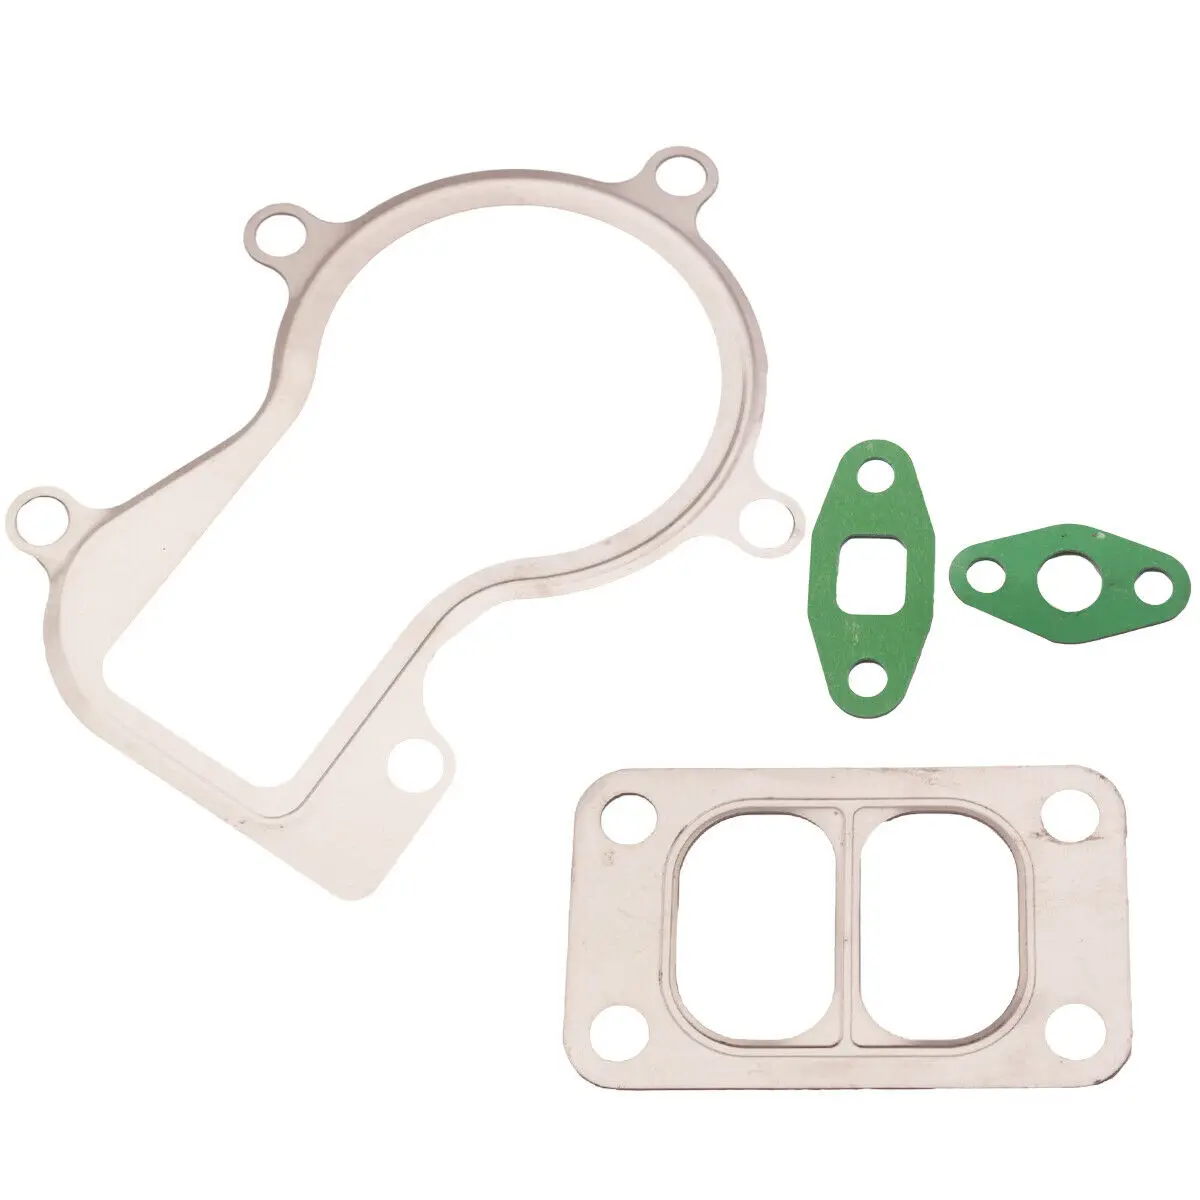 Turbo Gasket Set for Holset HX35 HX35W HX40 HX40W Turbo Divided Flange Oil Inlet Outlet 